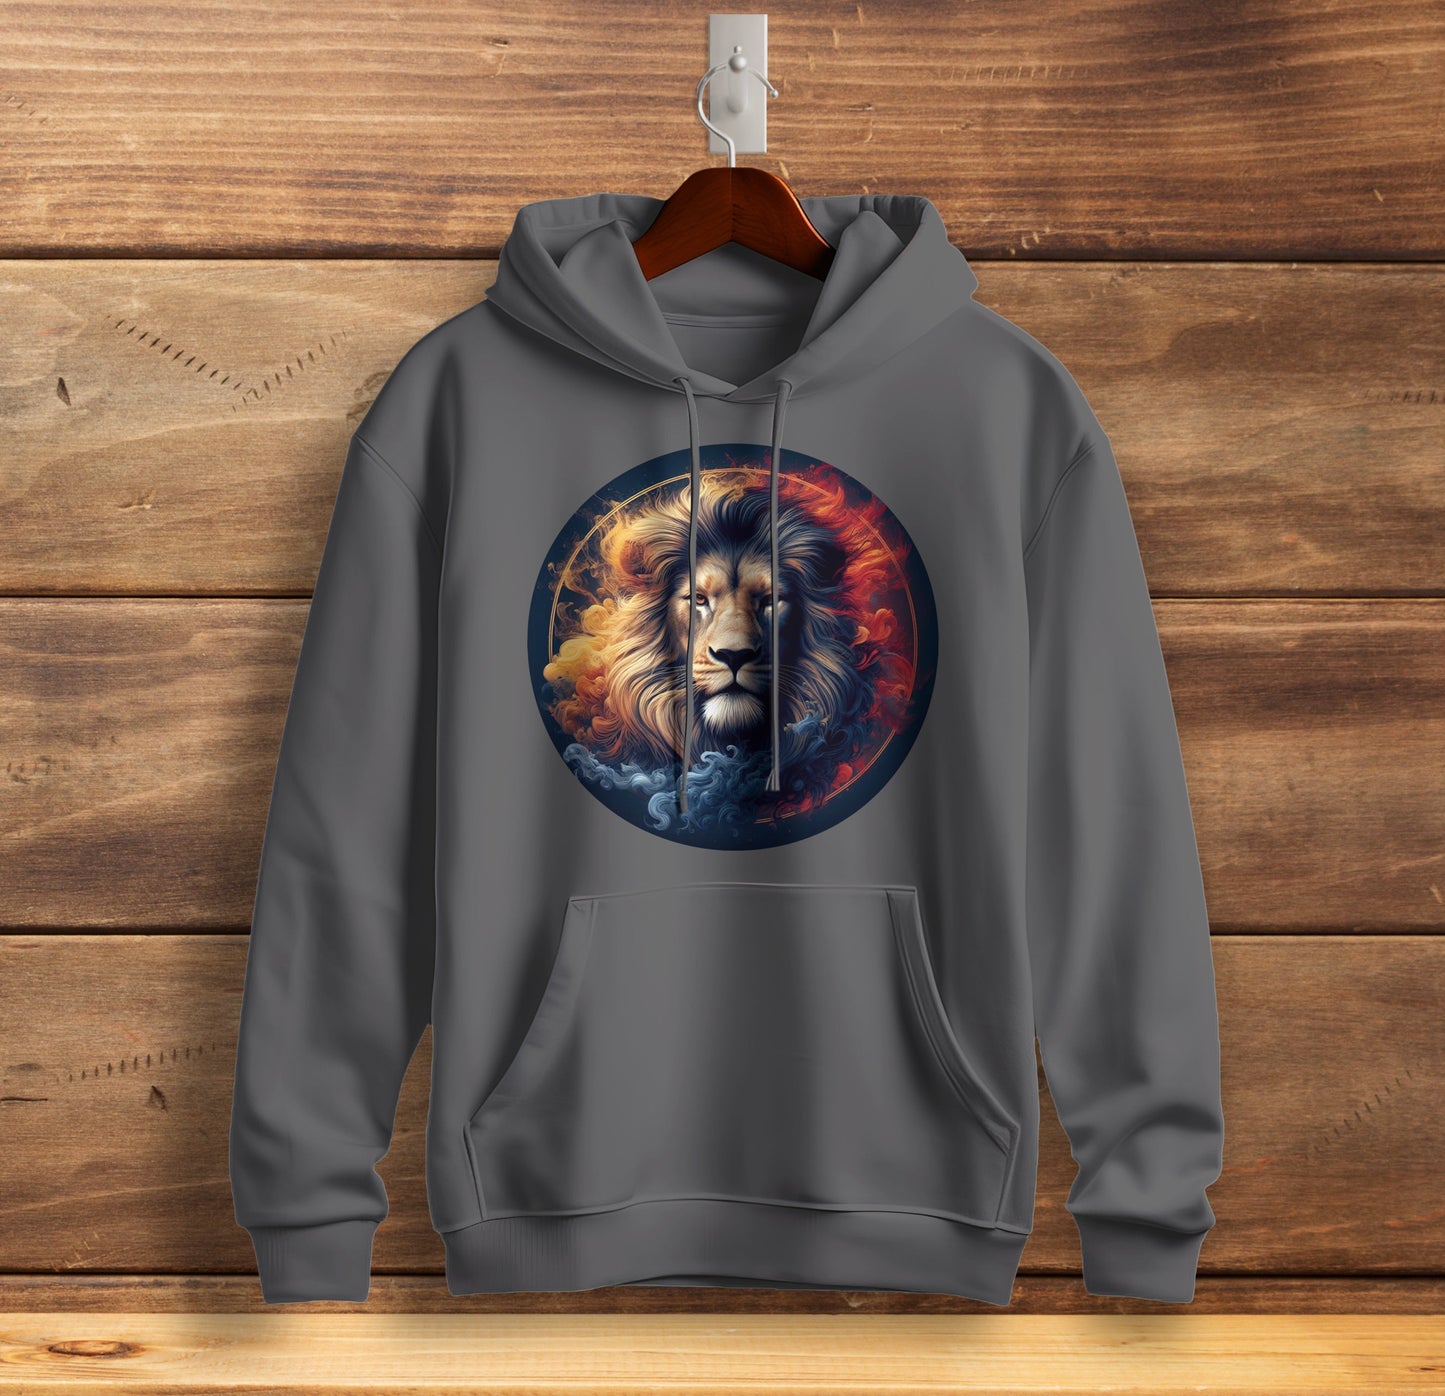 Lion's Strength - Graphic Printed Hooded Sweat Shirt for Men - Cotton - Magnificence of India Sweat Shirt